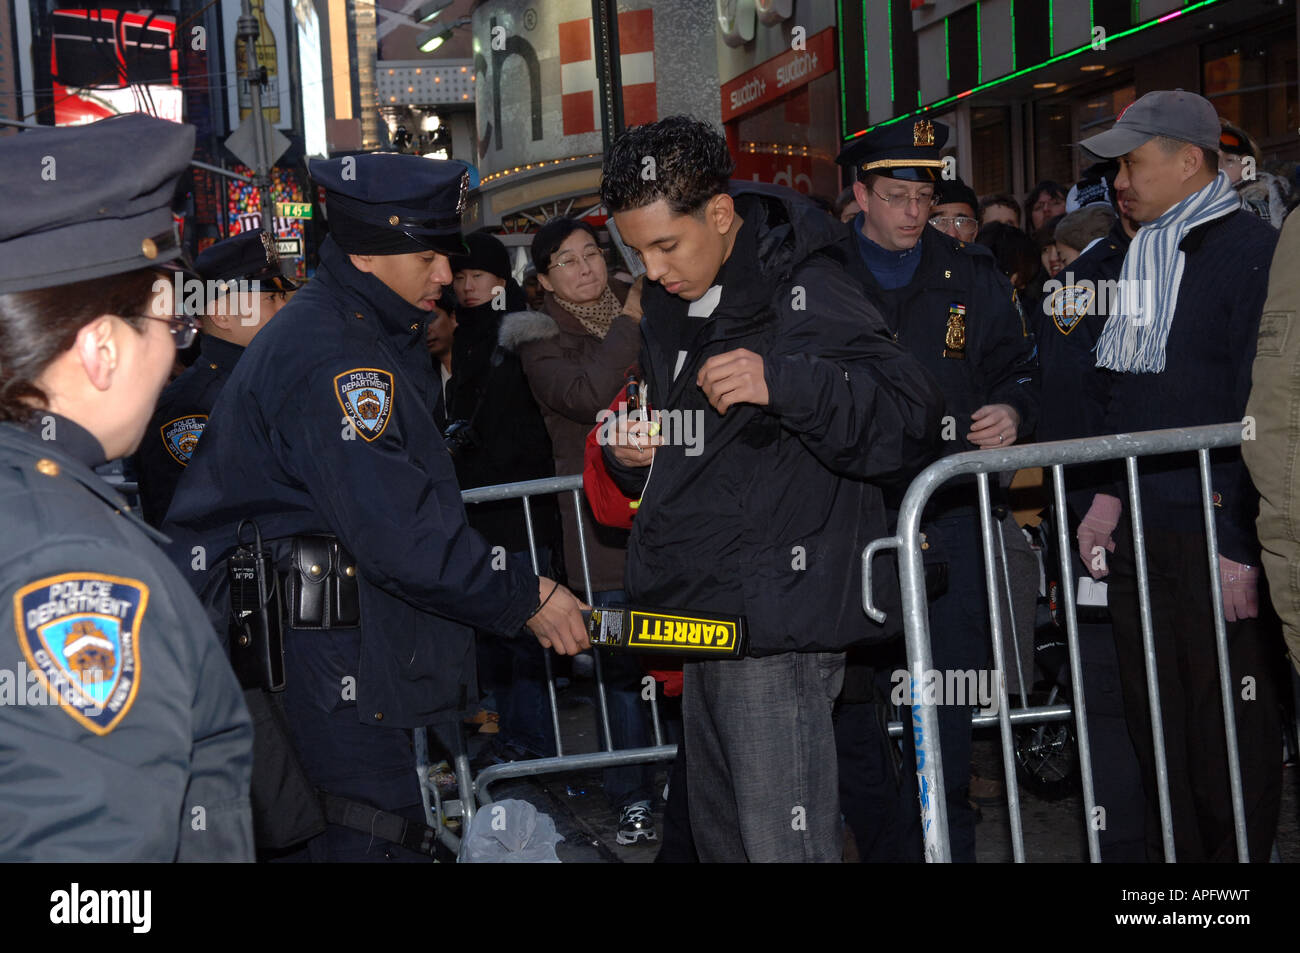 NYPD officers use metal detectors on celebrants entering Times Sqaure on New Year s Eve Stock Photo